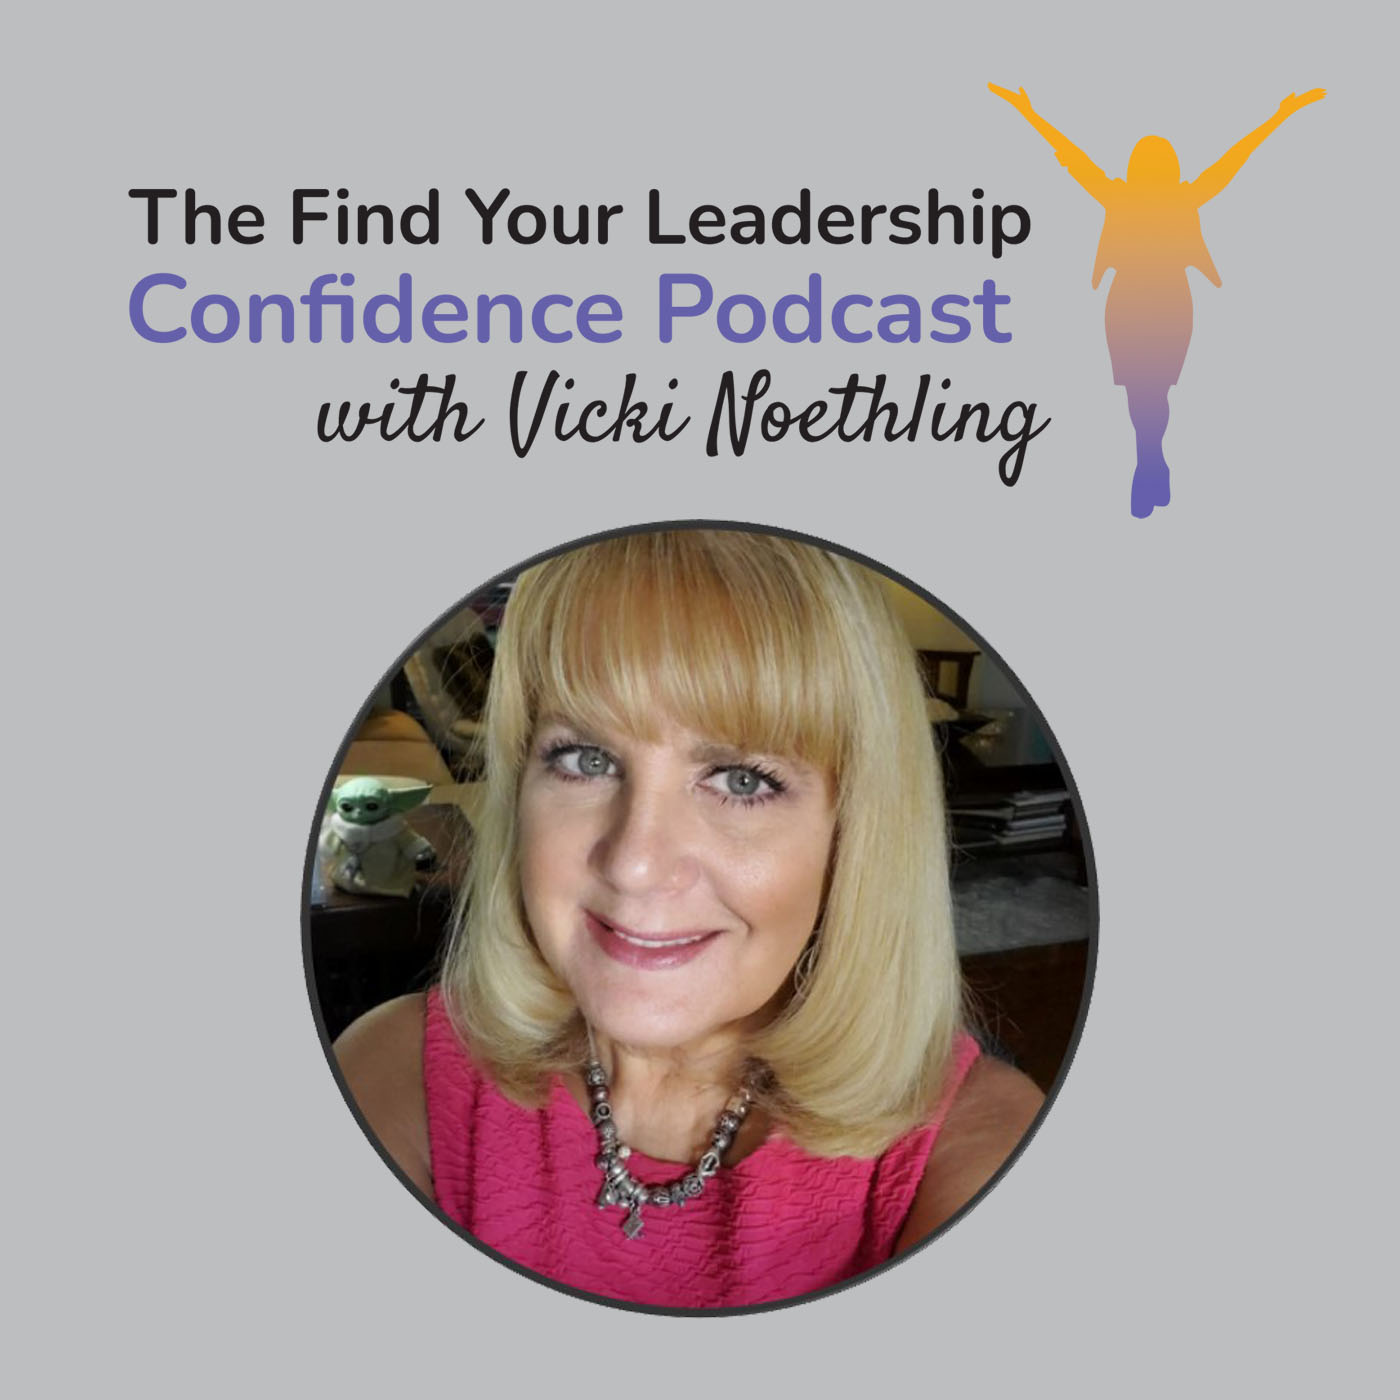 The Find Your Leadership Confidence Podcast with Vicki Noethling